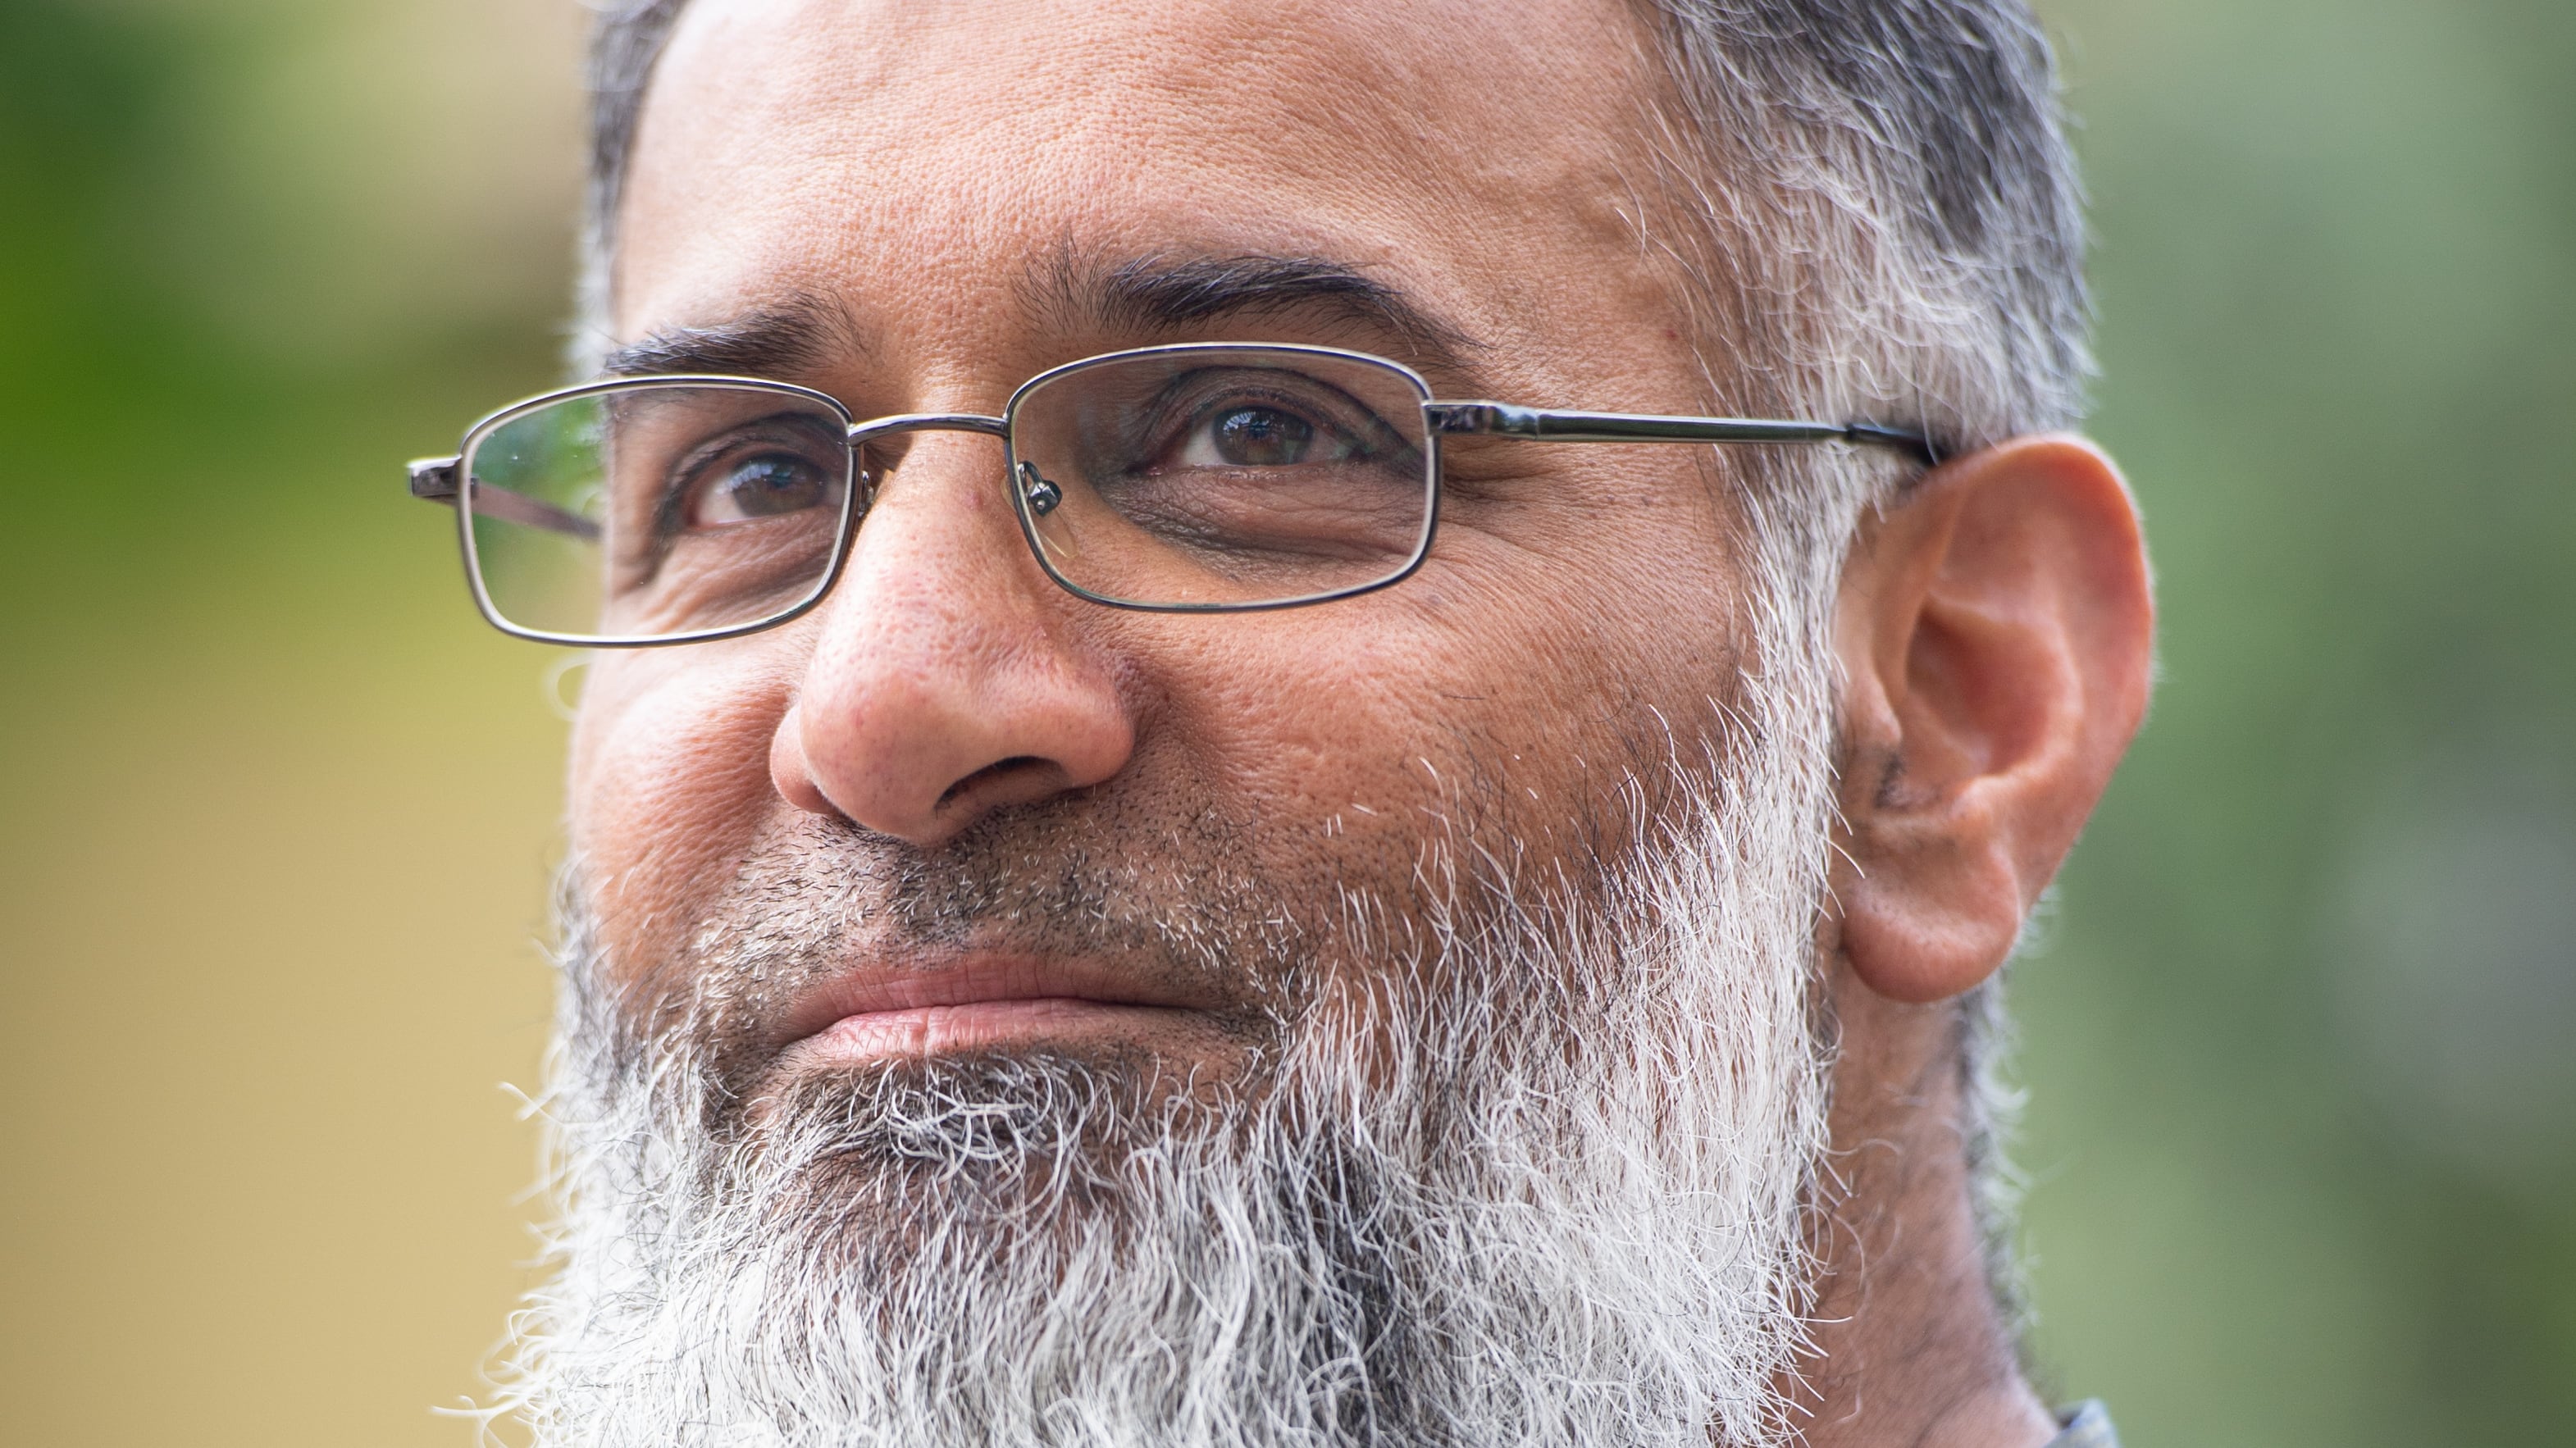 Anjem Choudary has pleaded not guilty to two terror offences relating to banned organisation Al-Muhajiroun